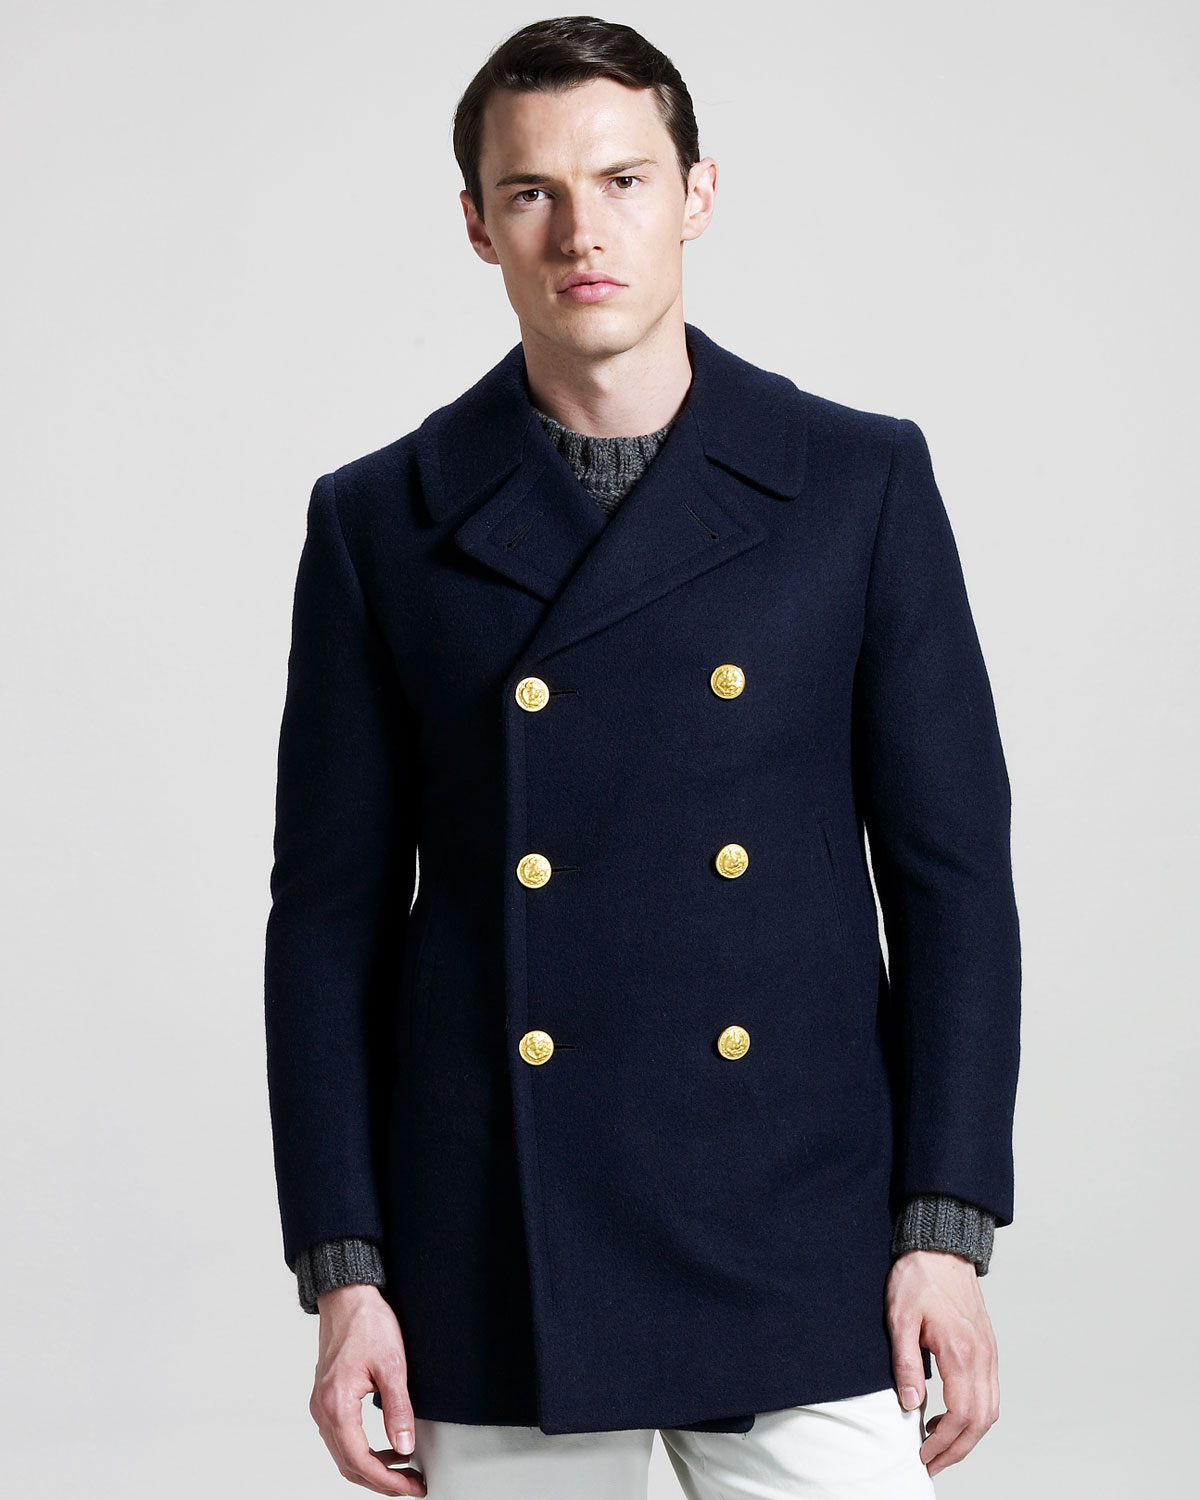 Lyst - Band Of Outsiders Wool Pea Coat in Blue for Men